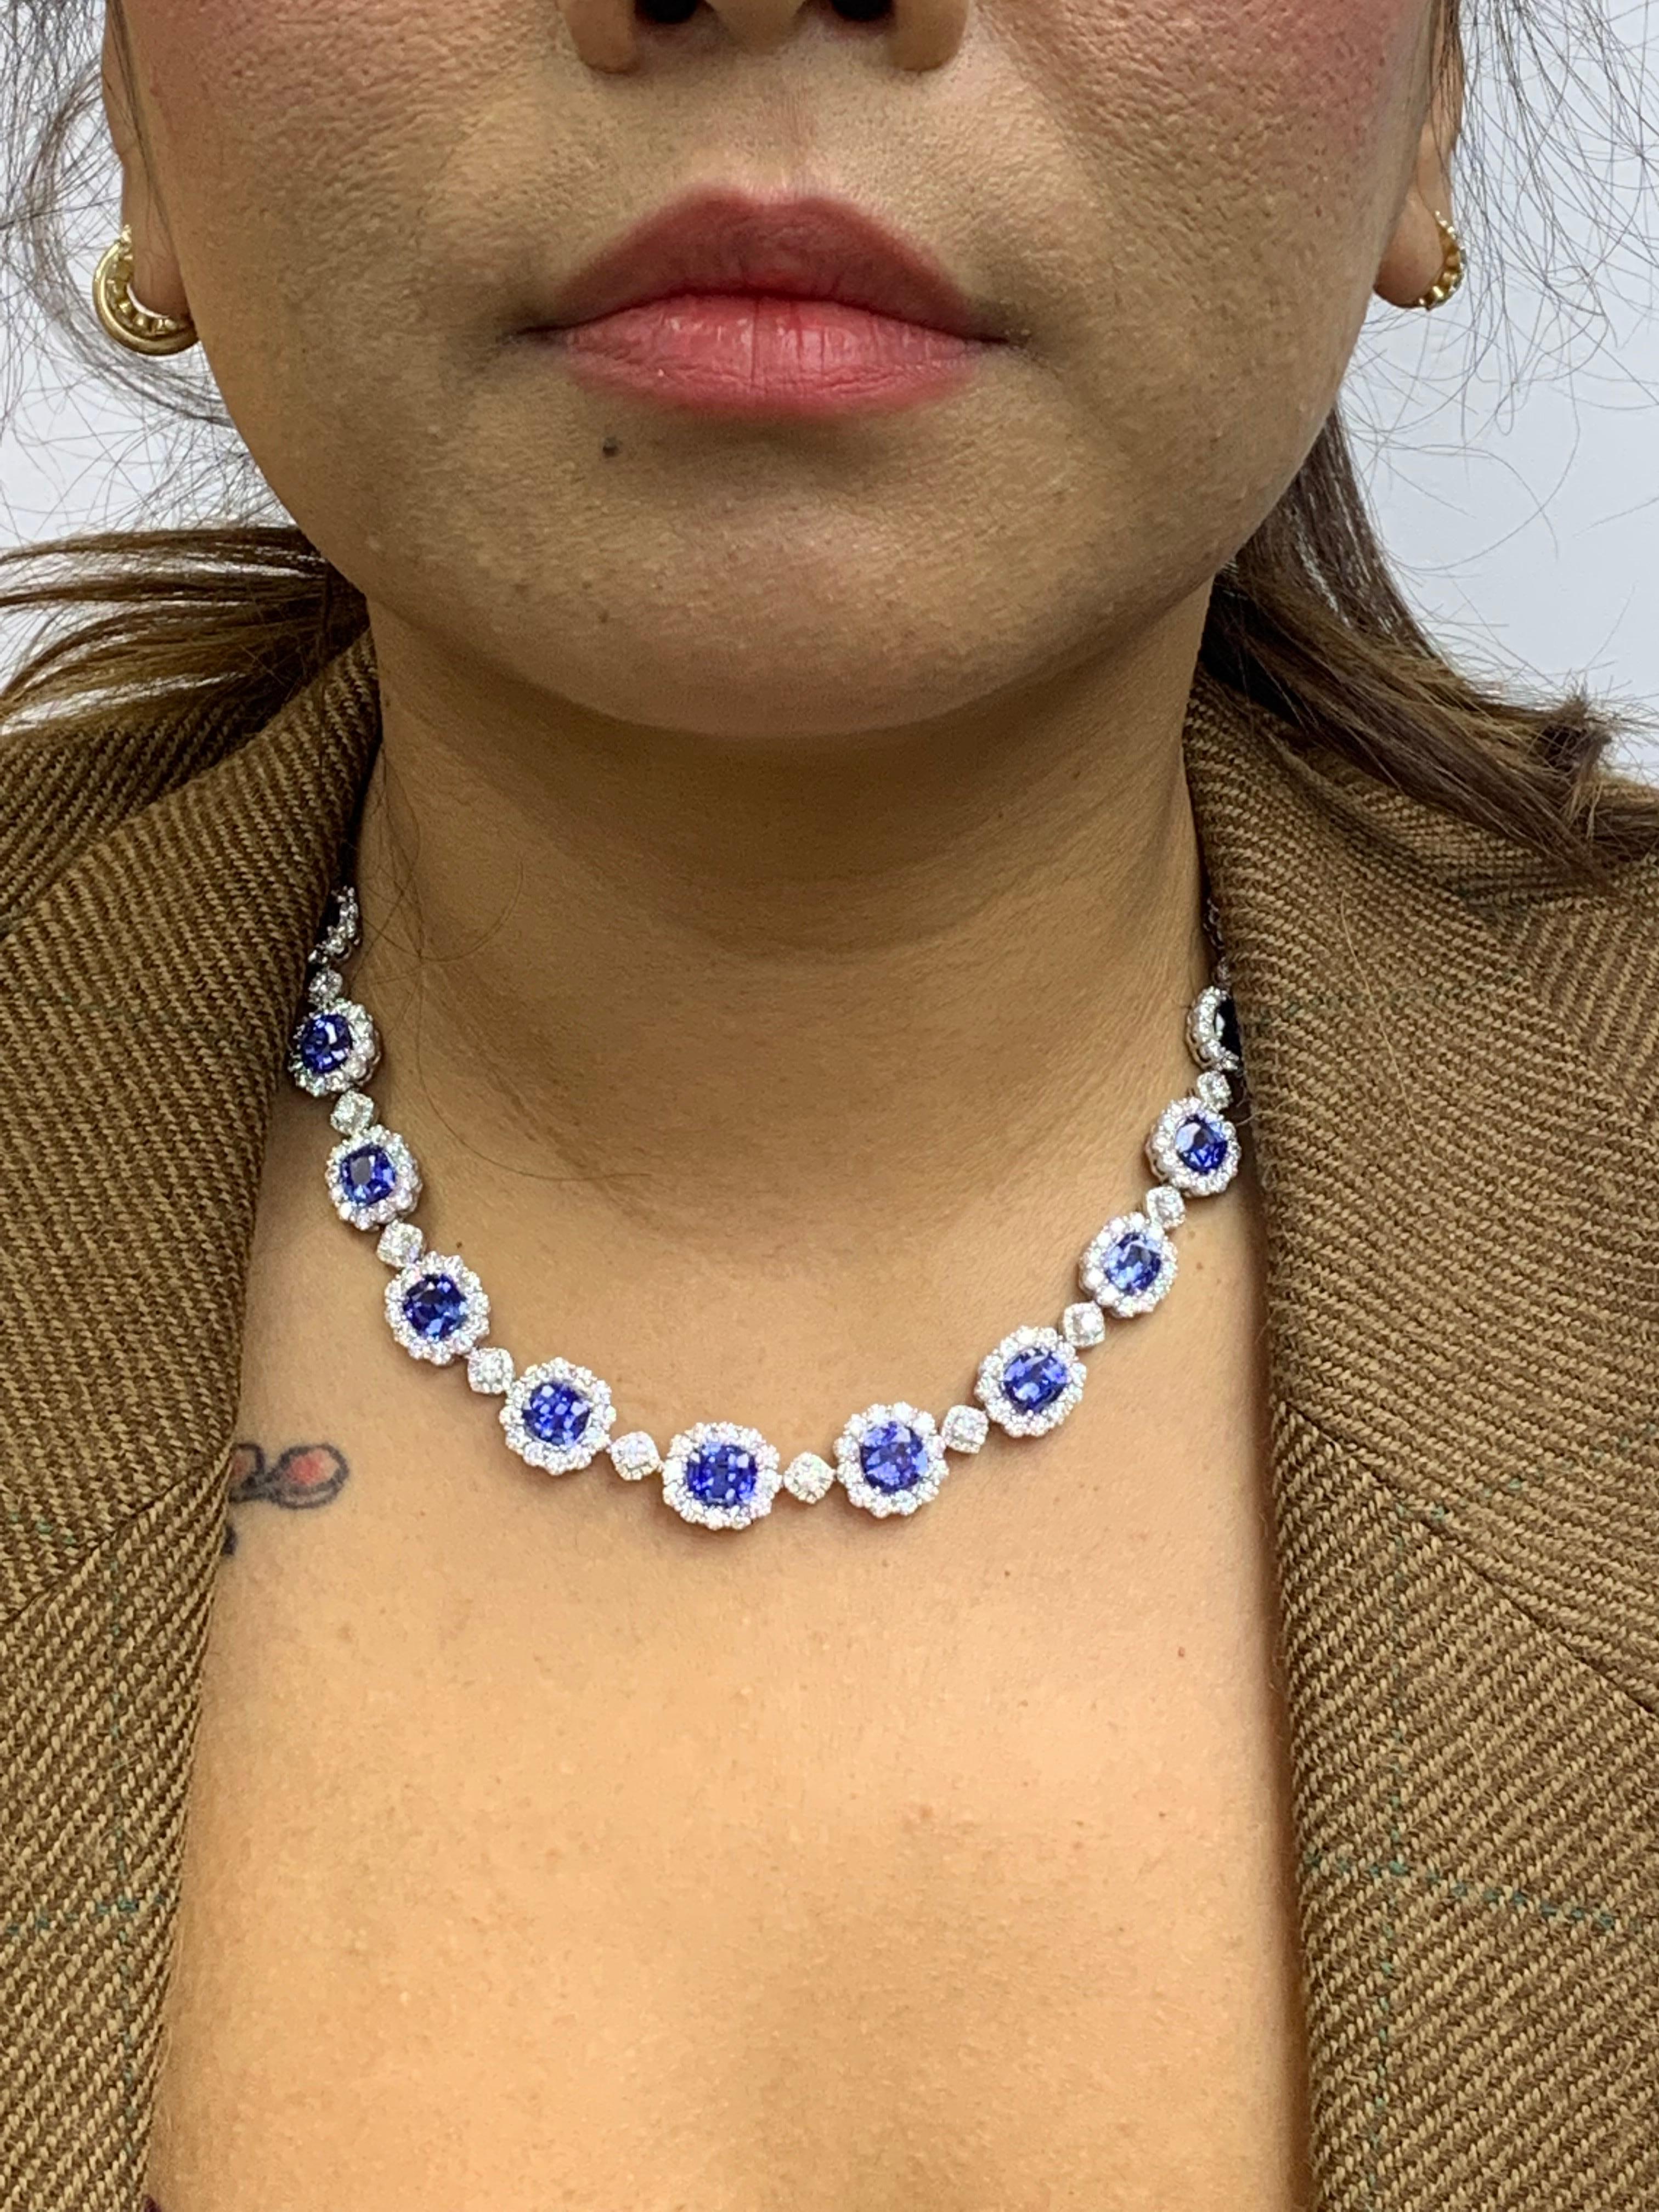 Contemporary 35.11 Carat Cushion Cut Blue Sapphire and Diamond Necklace in 18K White Gold For Sale